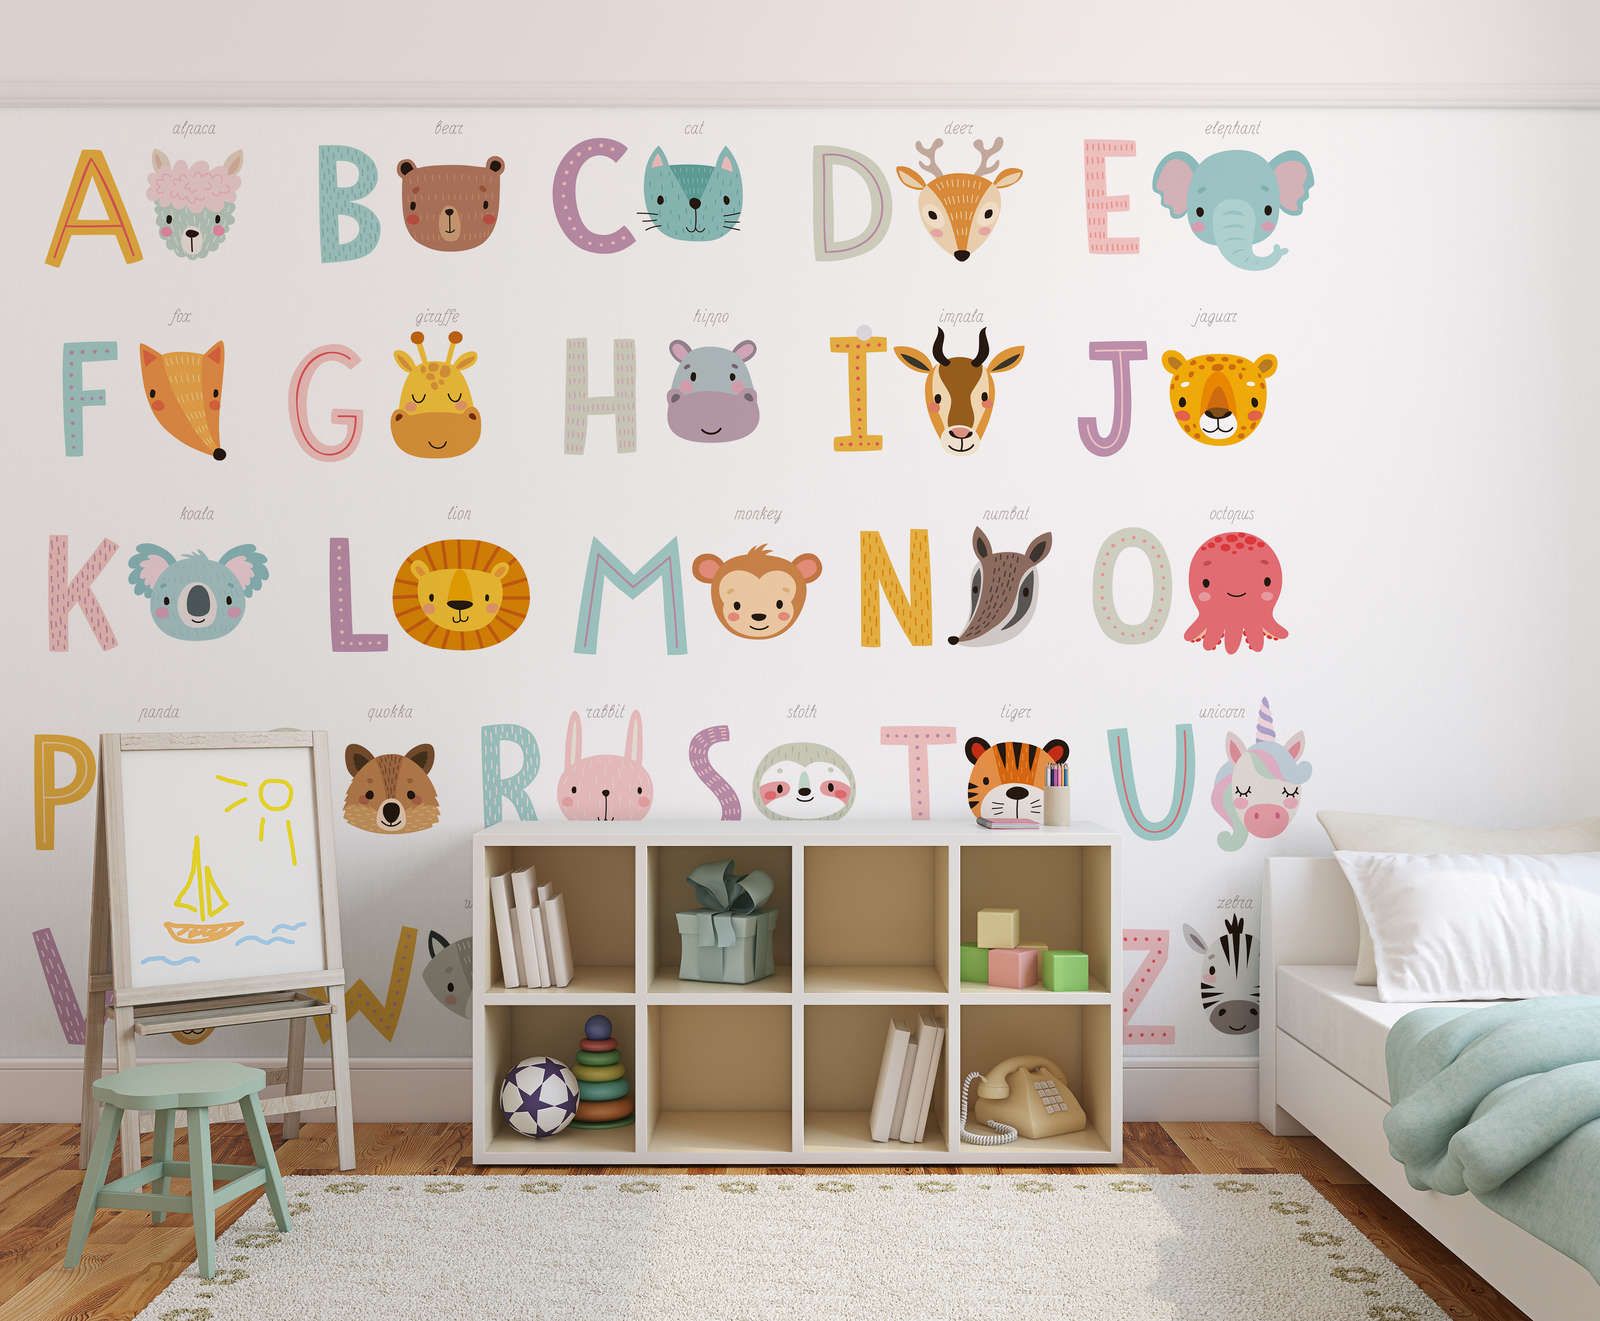             Photo wallpaper ABC with animals and animal names - Smooth & pearlescent fleece
        